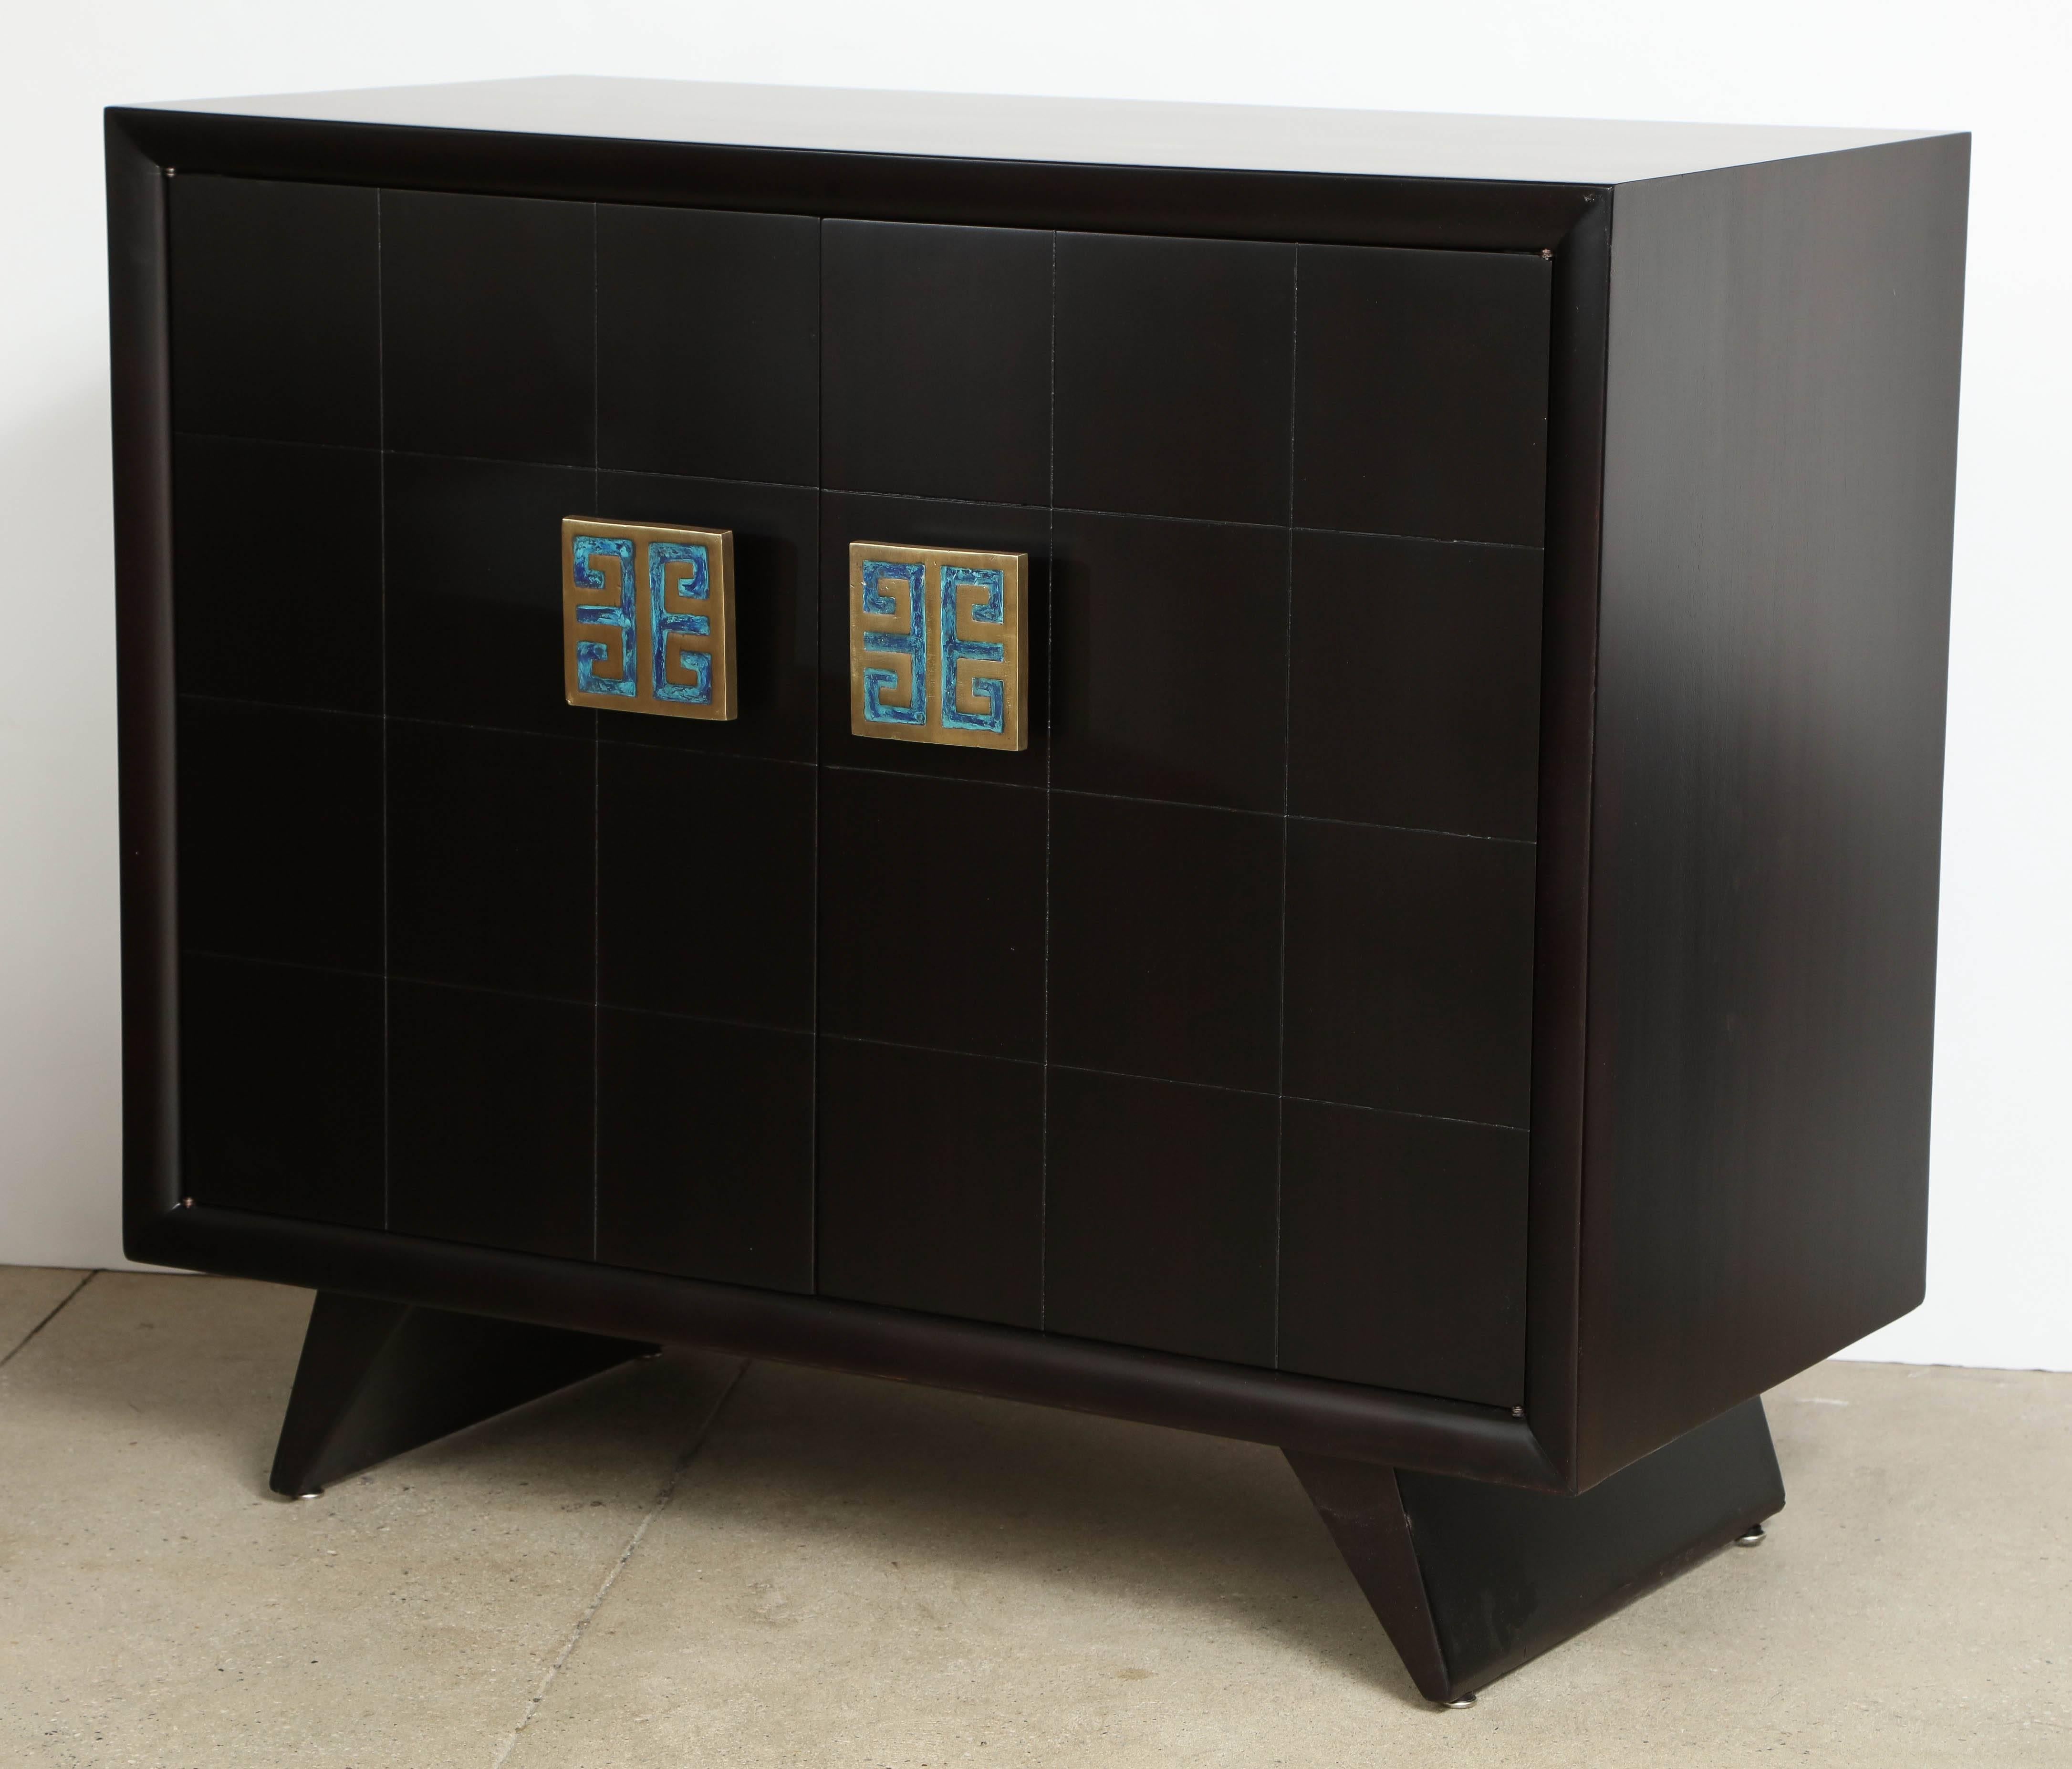 Pair of matte finished ebonized mahogany cabinets by Grosfeld House of New York with large Pepe Mendoza bronze pulls with blue and green enamel. Cabinets have two doors which conceal four pull-out drawers. Mint restored.
Partial foil label to